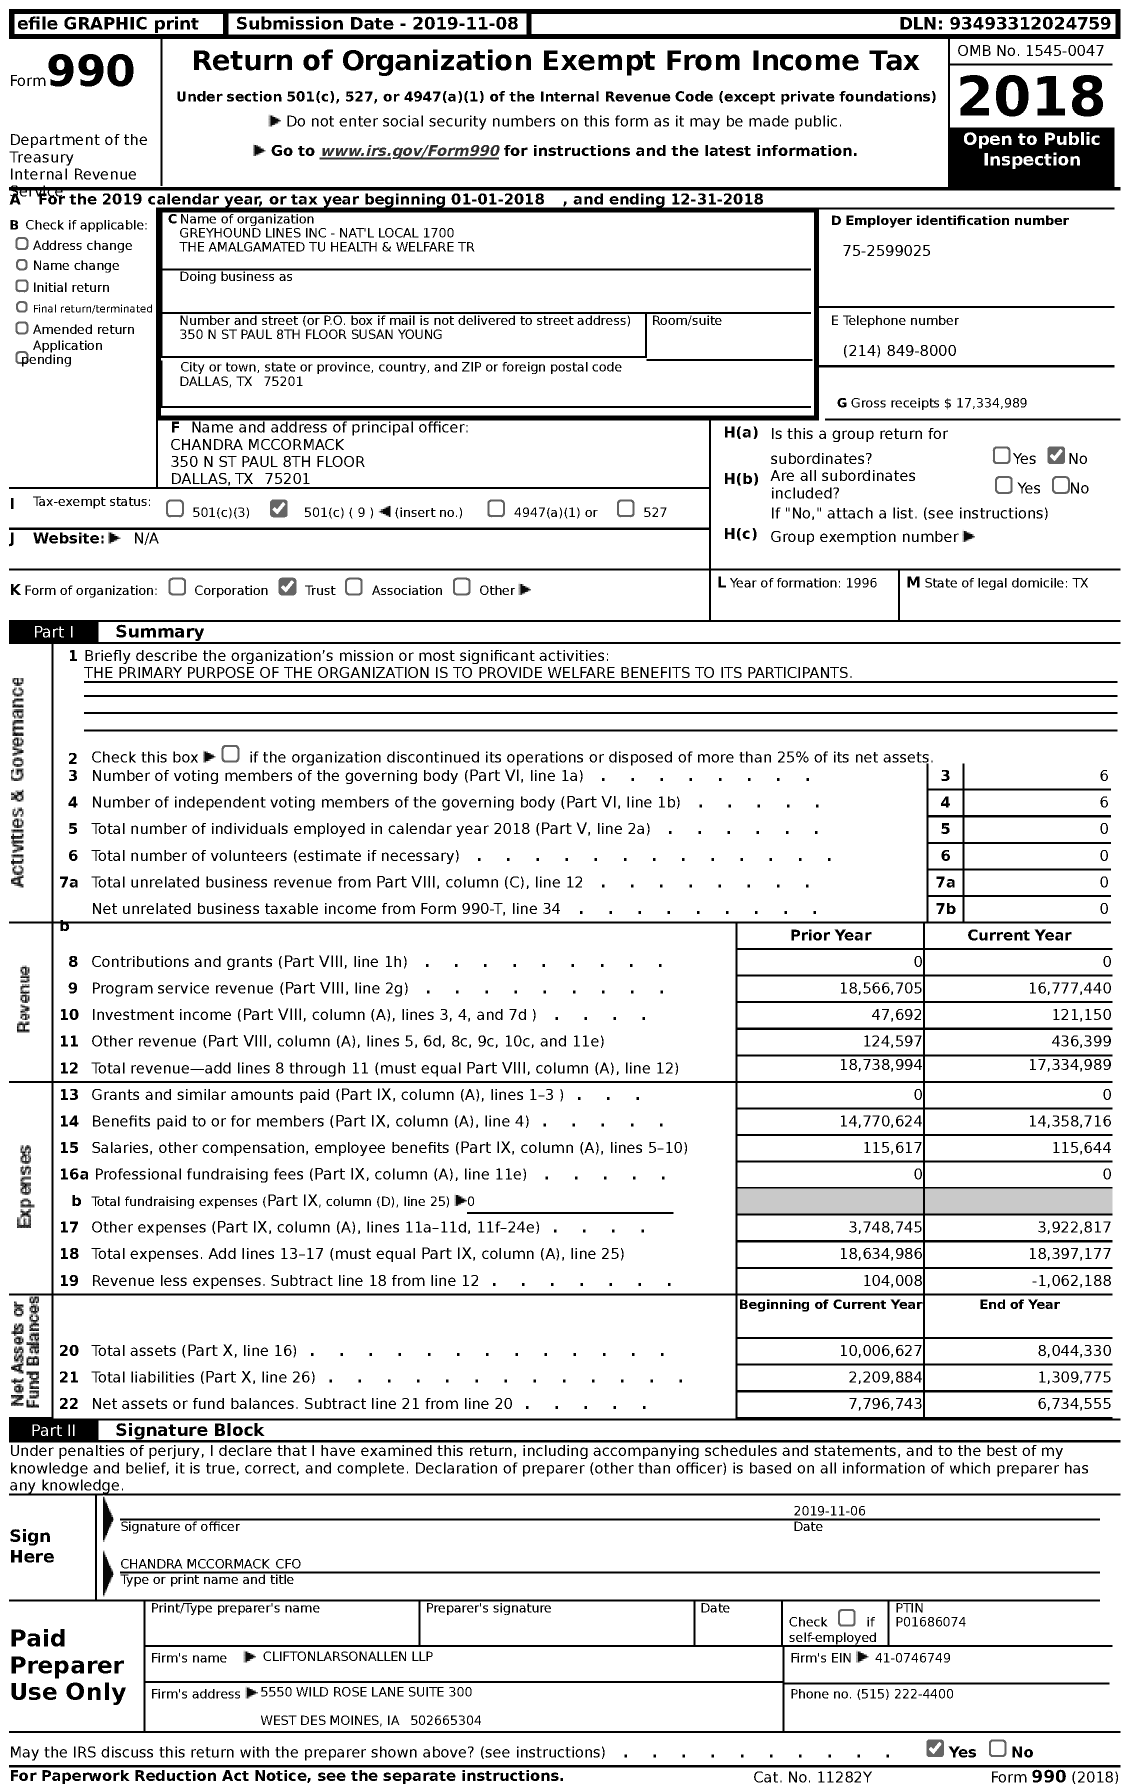 Image of first page of 2018 Form 990 for Greyhound Lines - Nat'l Local 1700 the Amalgamated Tu Health and Welfare Trust